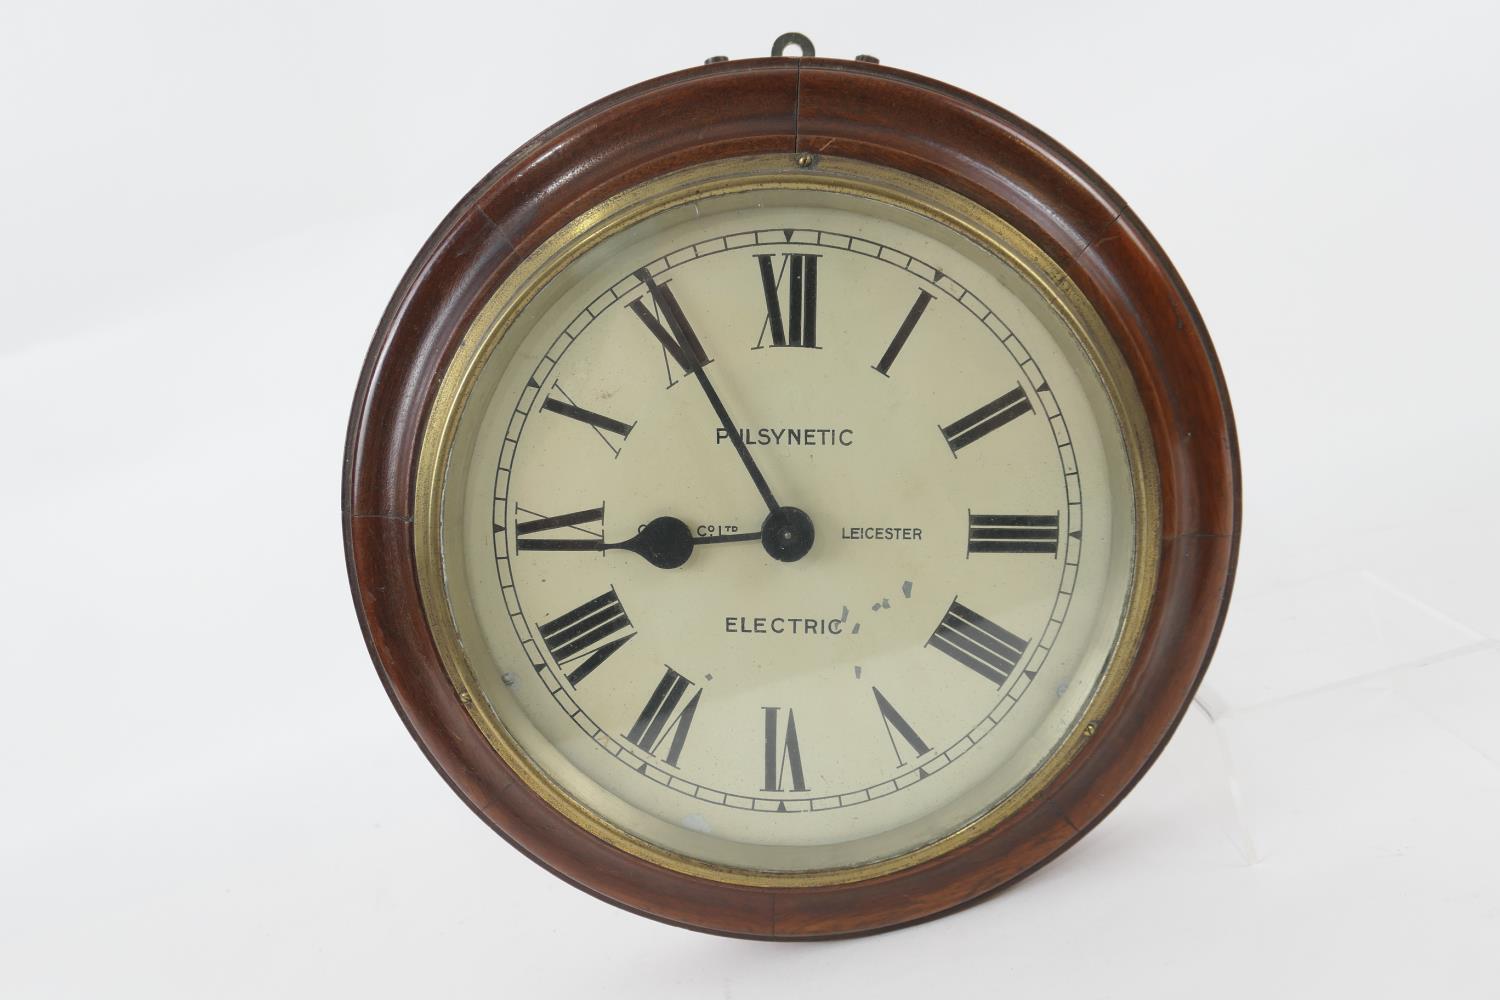 Pulsynetic electric dial wall clock, by Gent & Co., Leicester, 8 1/2'' dial with Roman numerals,